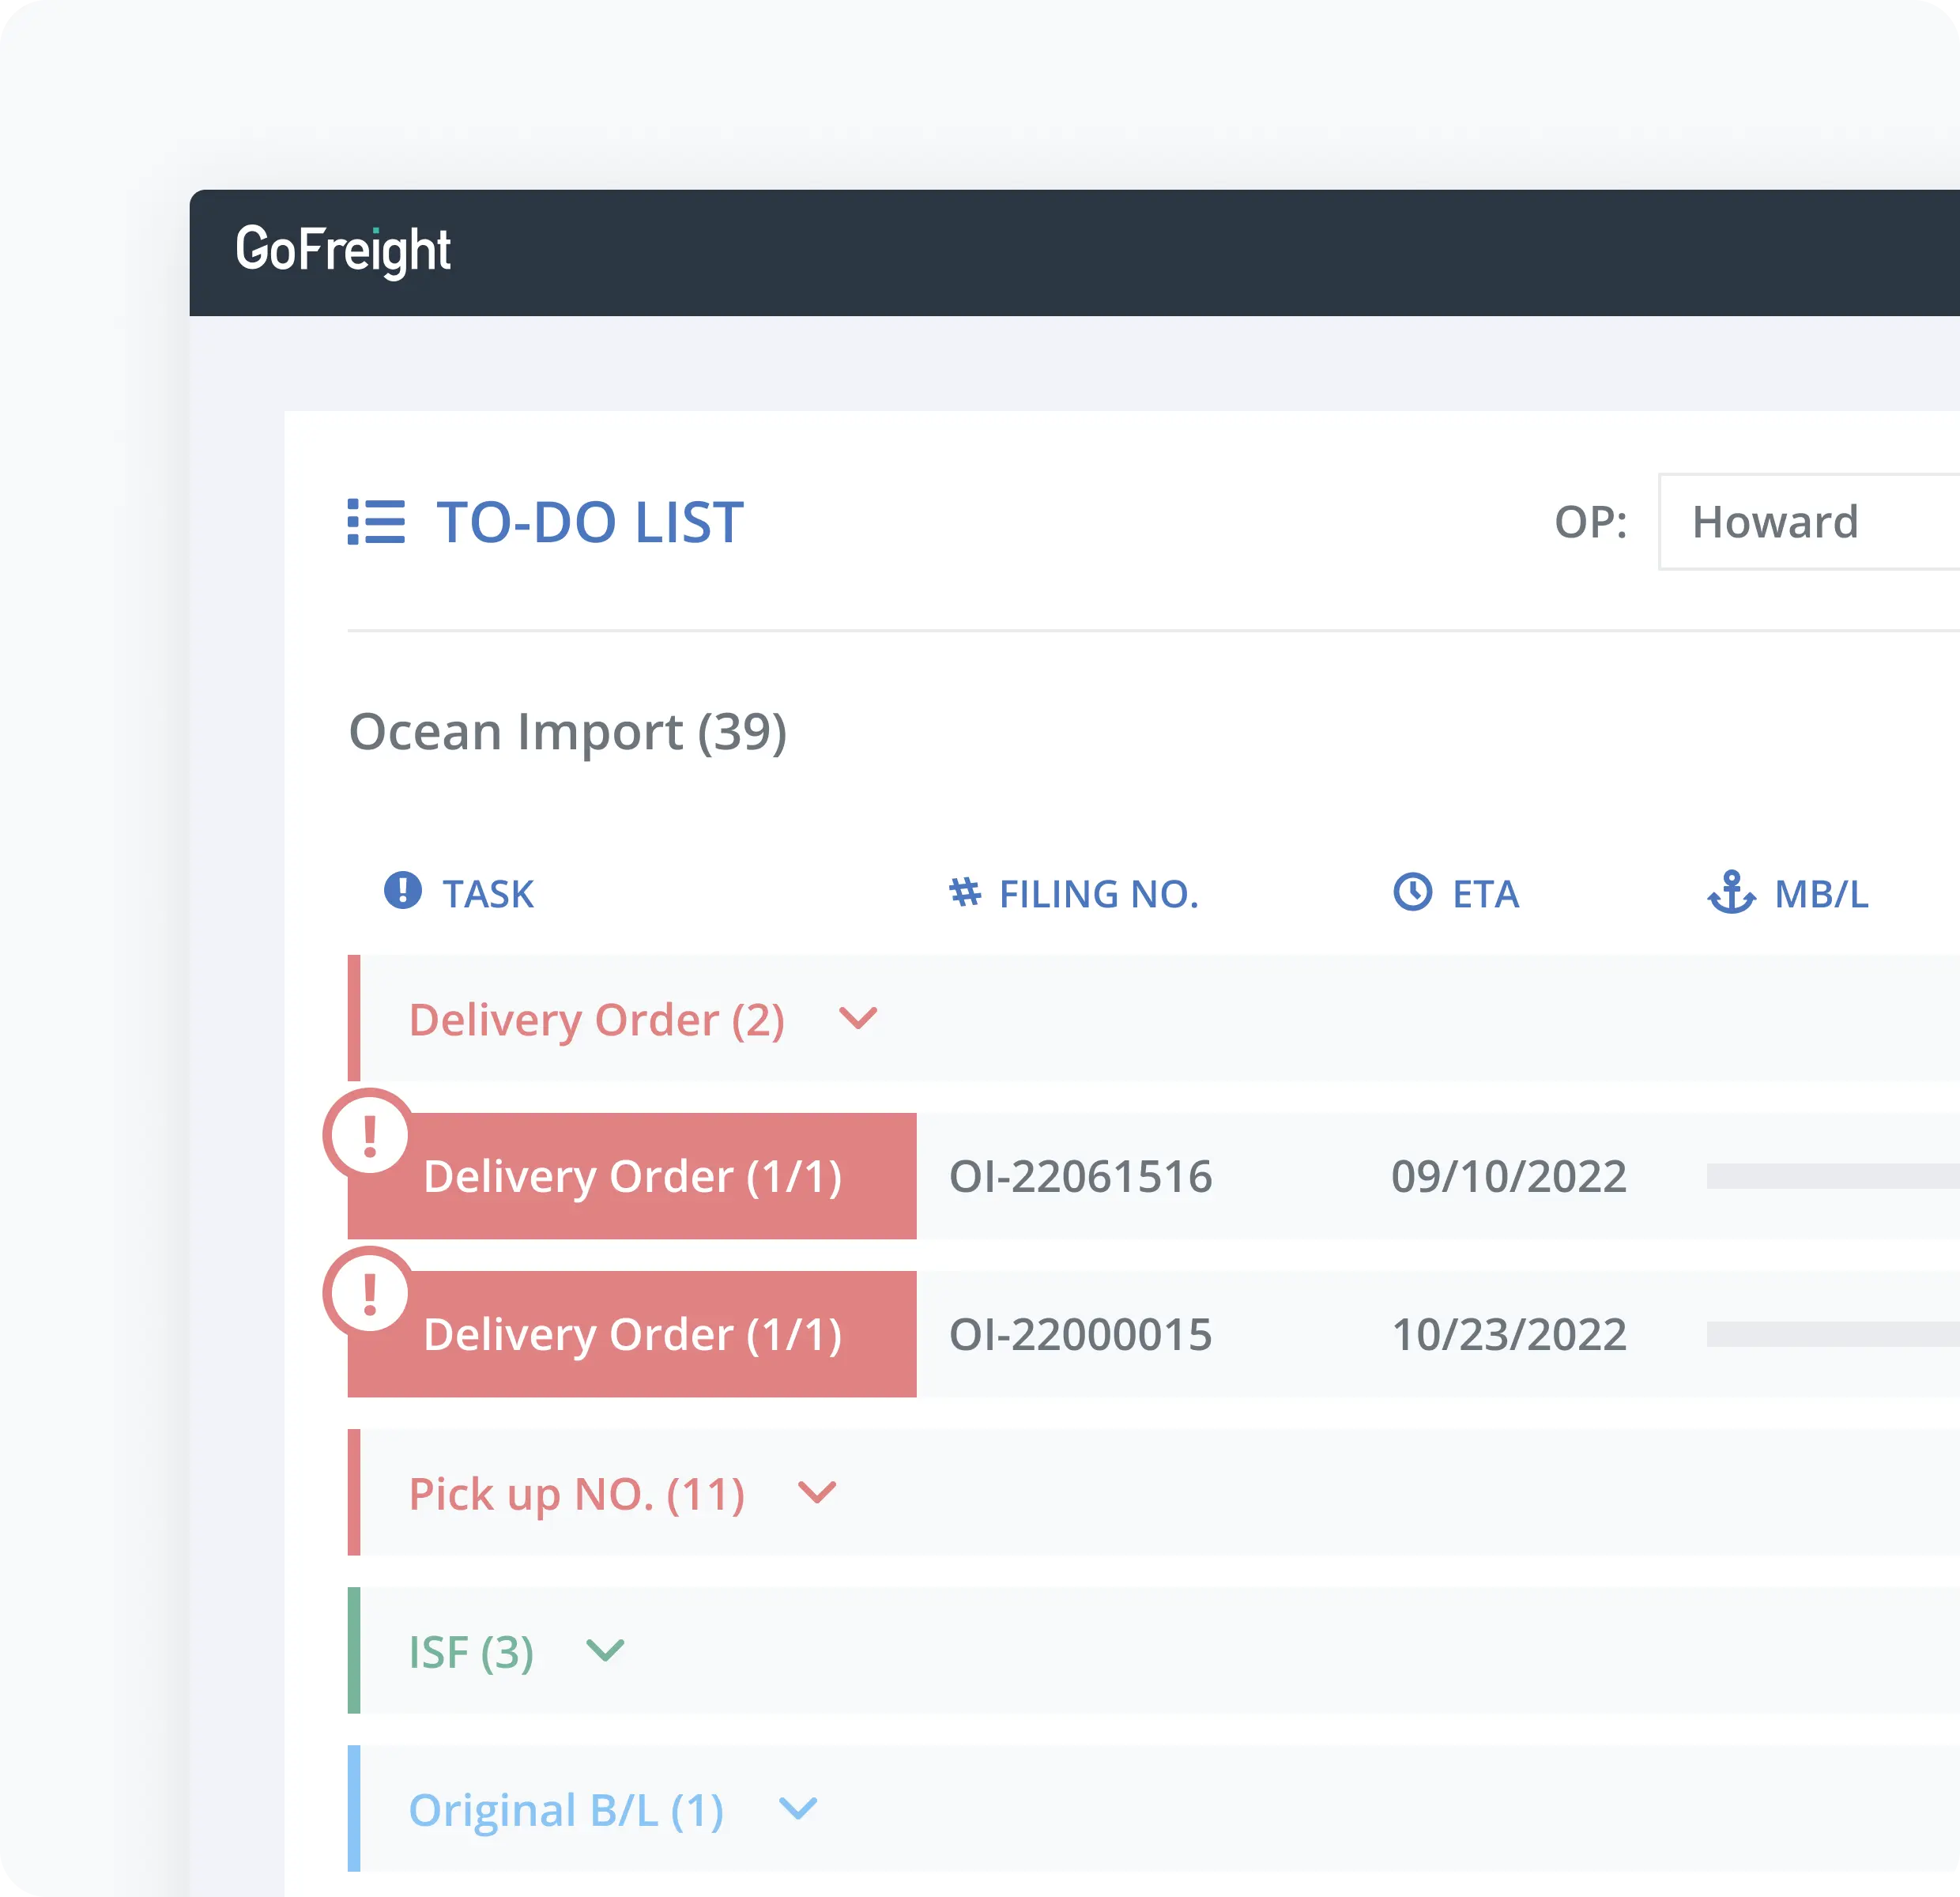 GoFreight’s To-Do List, which breaks deliveries down and shows filing numbers, ETAs, and MB/L information in one place.